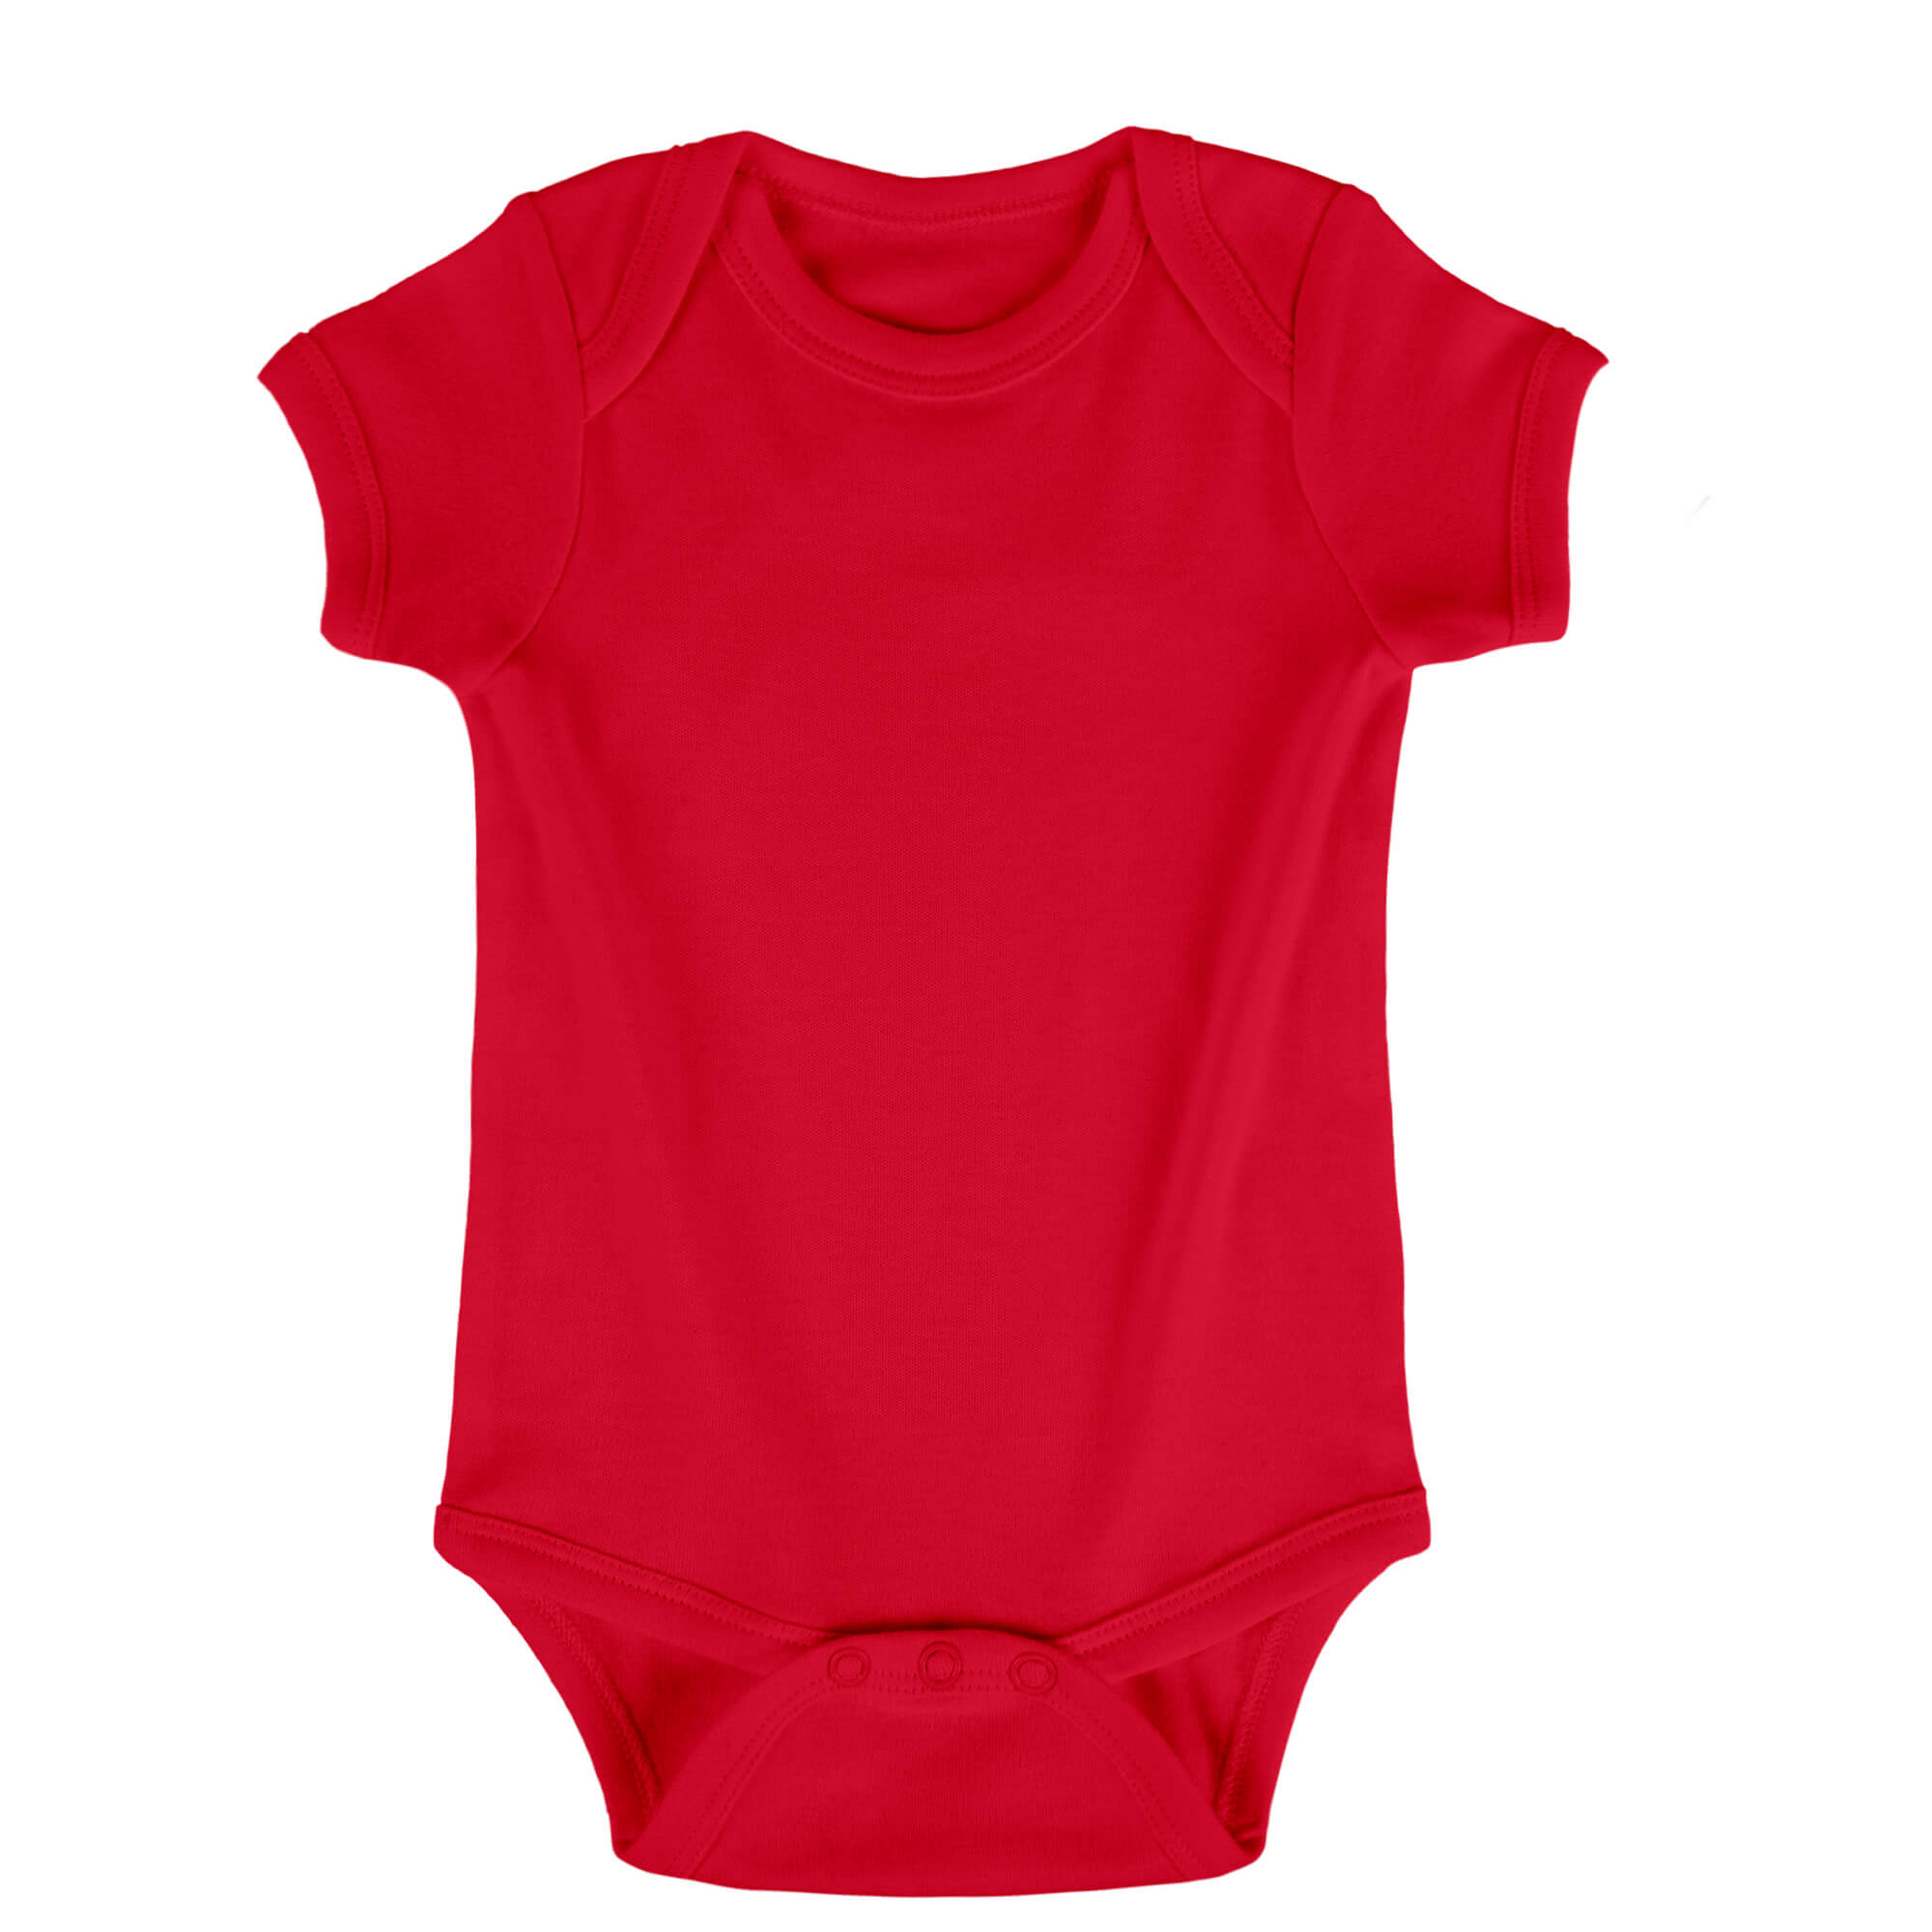 red color number #1, onesie color selection, and color display.